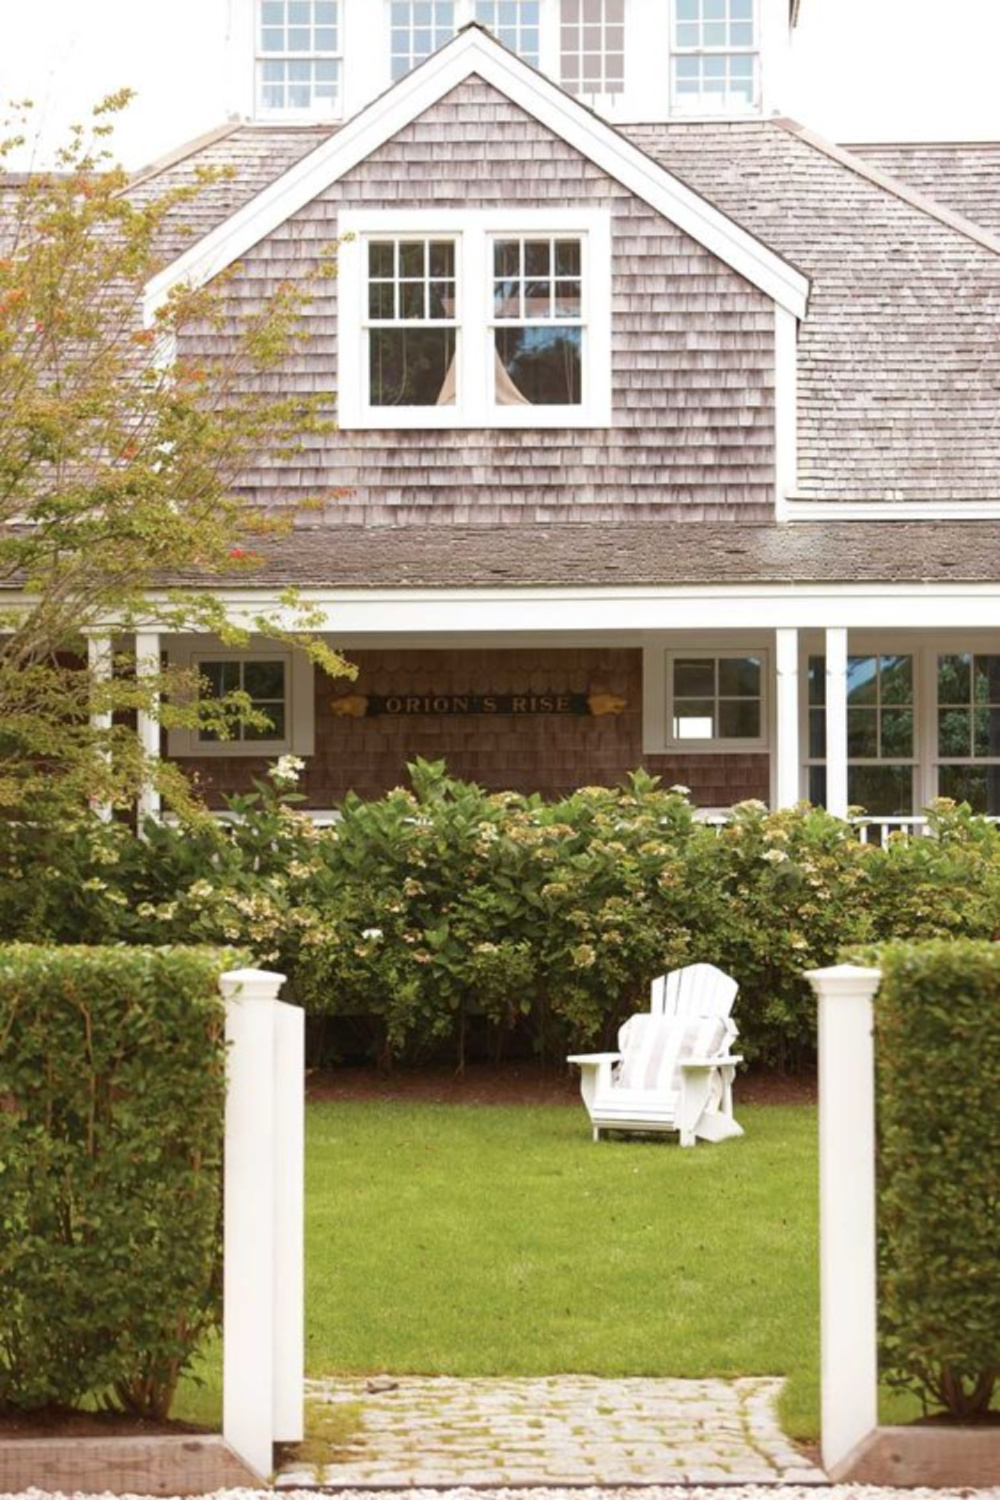 Magnificent New England cottage. COME TOUR MORE Nantucket Style Chic & Summer Vibes! #nantucket #interiordesign #designinspiration #summerliving #coastalstyle